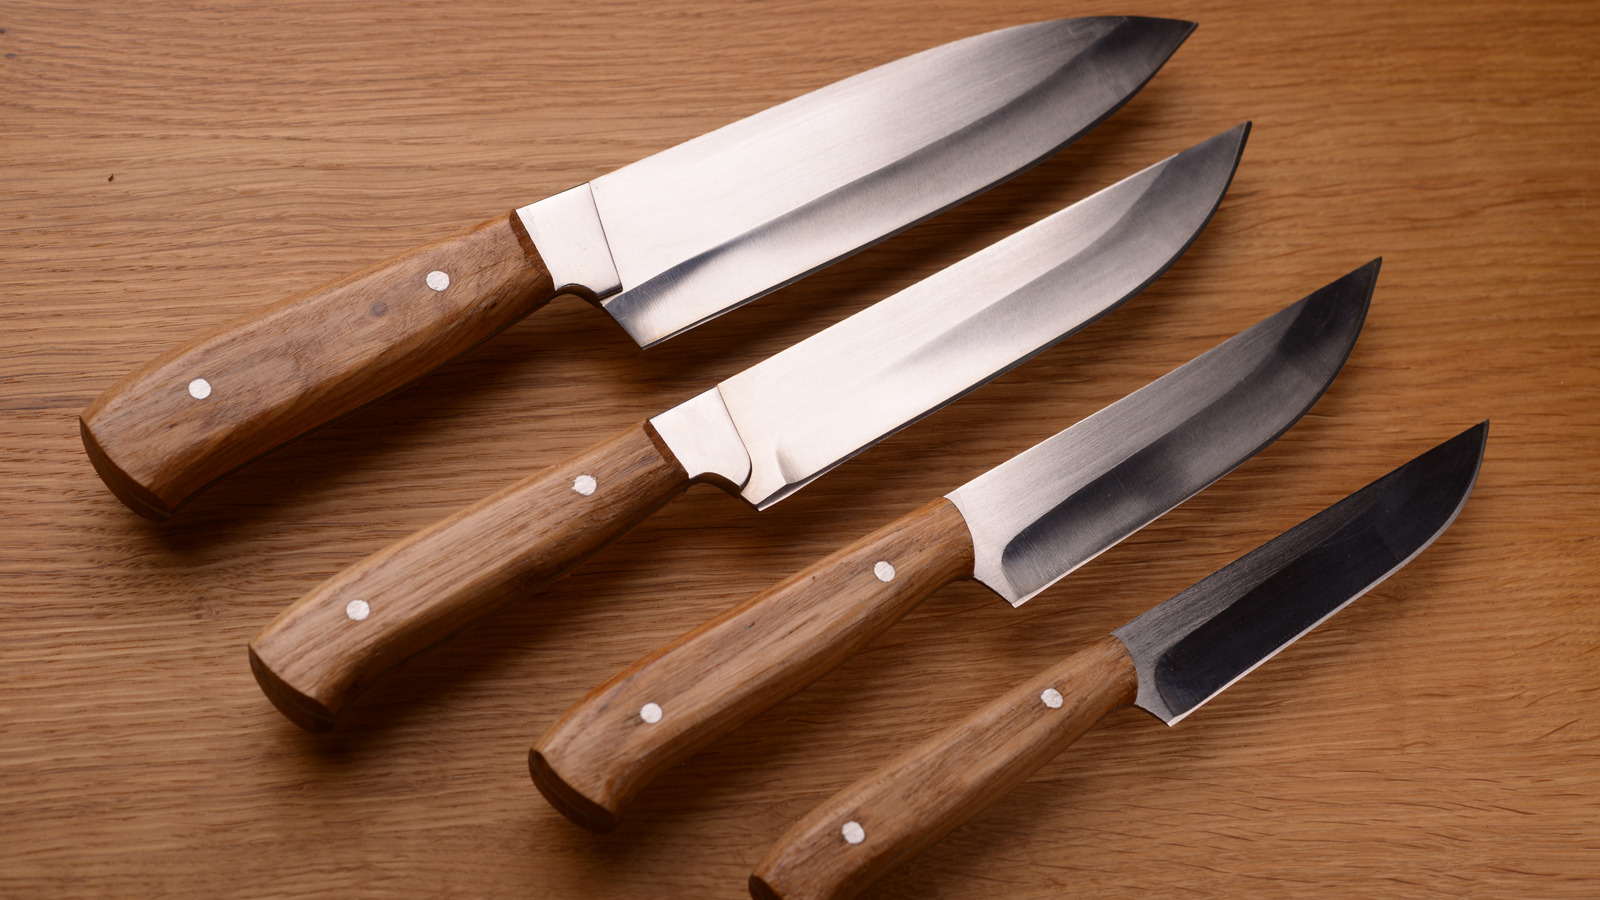 https://www.tastingtable.com/img/gallery/what-makes-carbon-steel-and-stainless-steel-knives-different/l-intro-1667315351.jpg